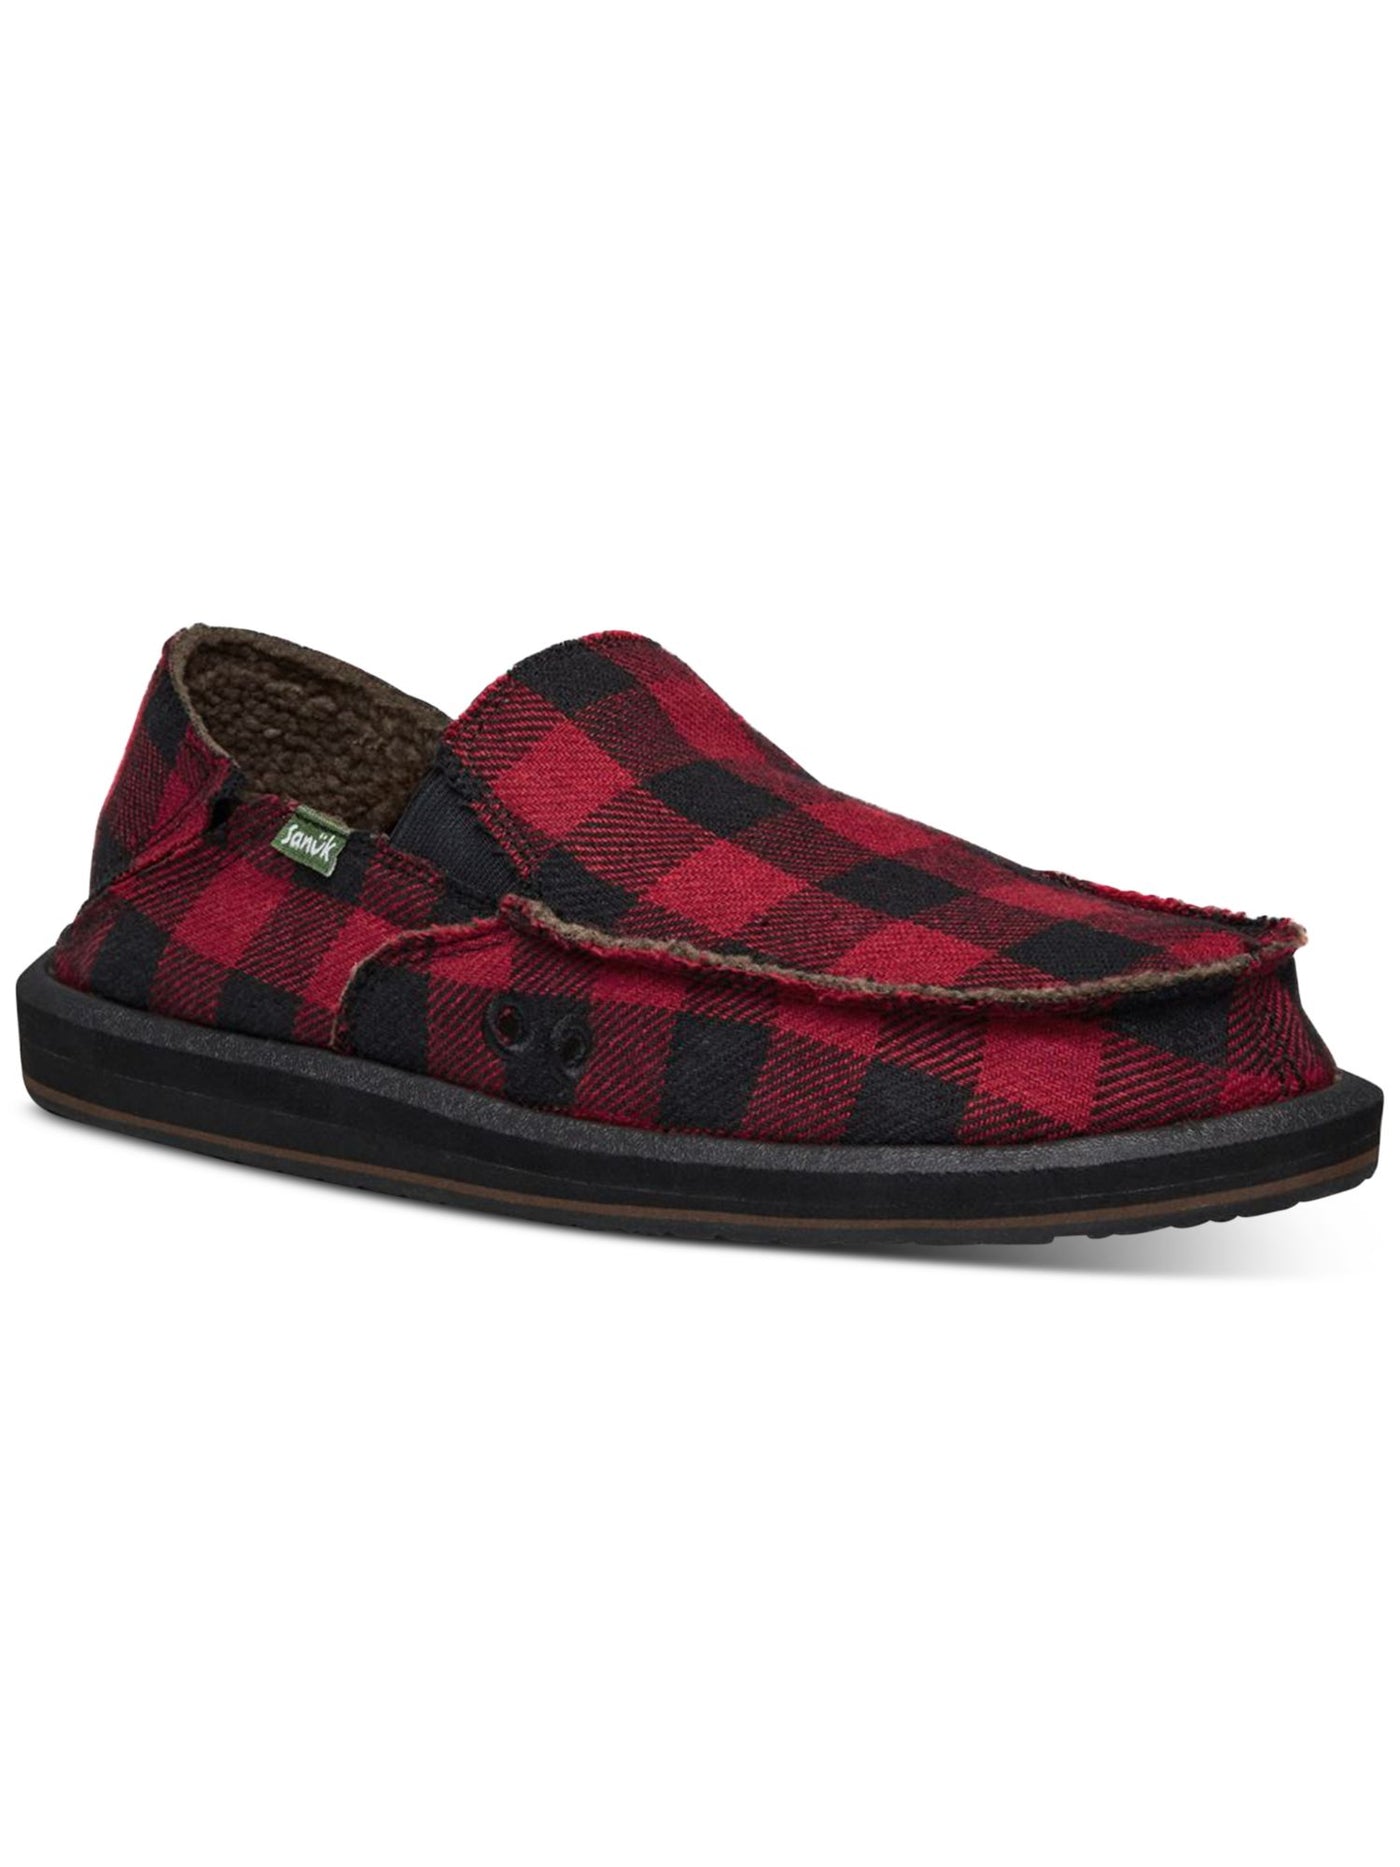 SANUK Mens Red Plaid Buffalo Padded Goring Comfort Vagabond Chill Round Toe Slip On Loafers Shoes 9